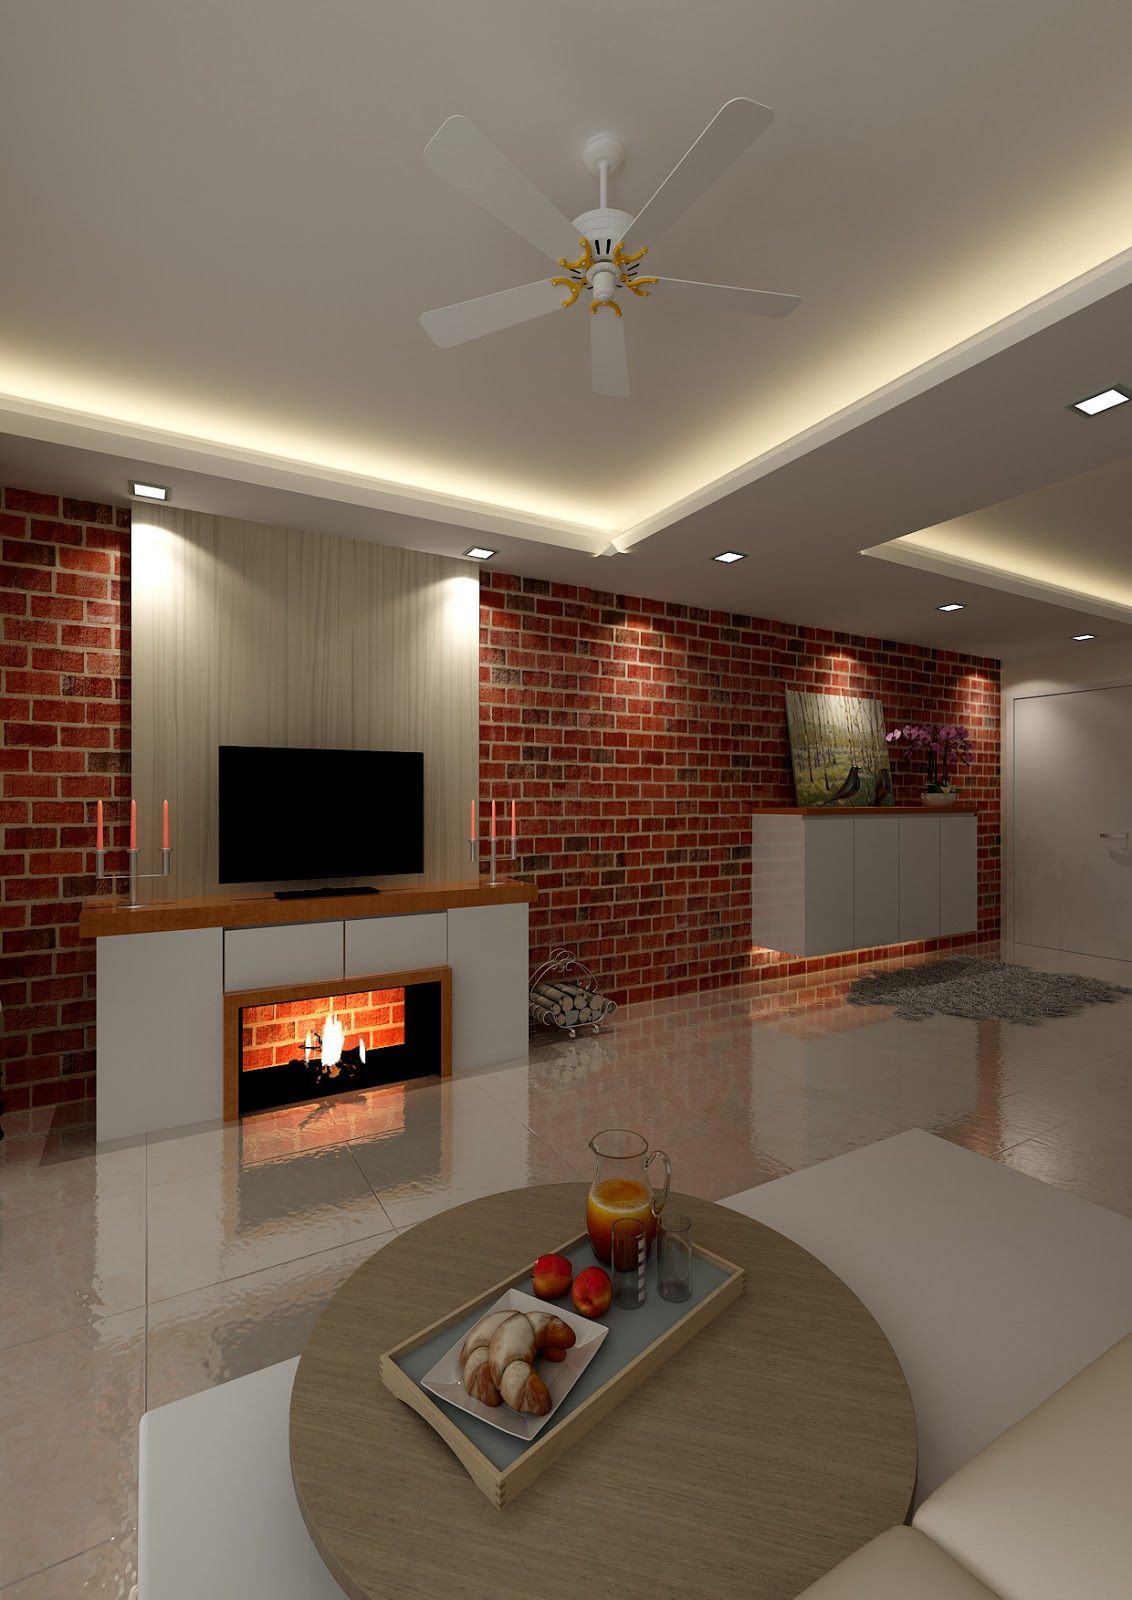  Tv Room Design for Large Space